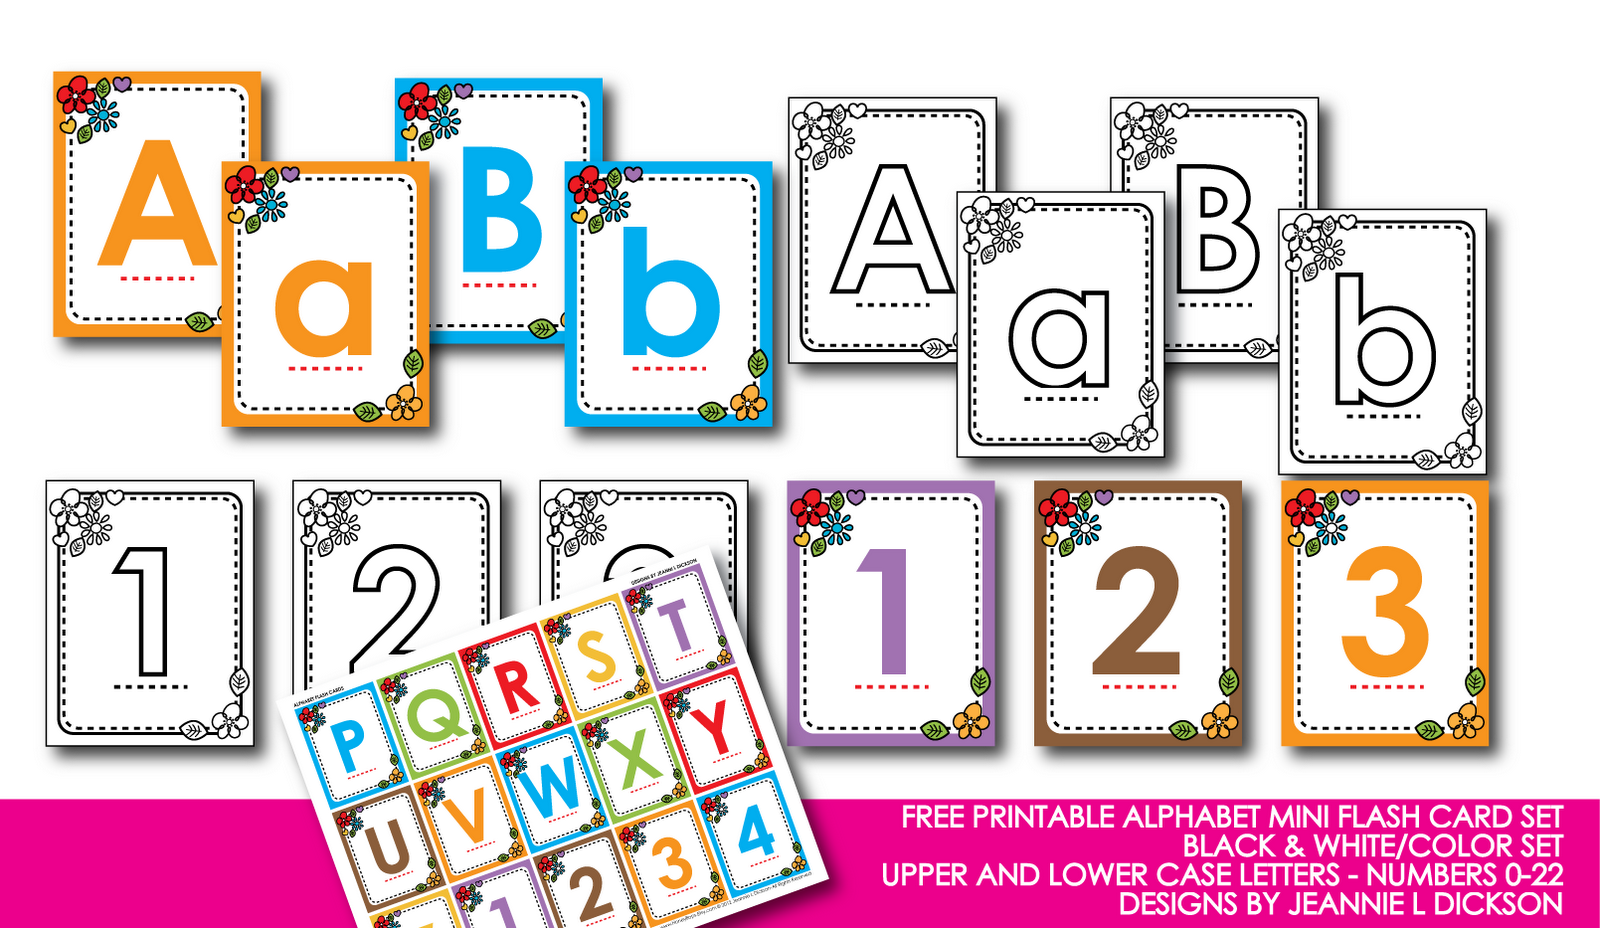 6-best-images-of-free-printable-the-whole-flash-cards-alphabet